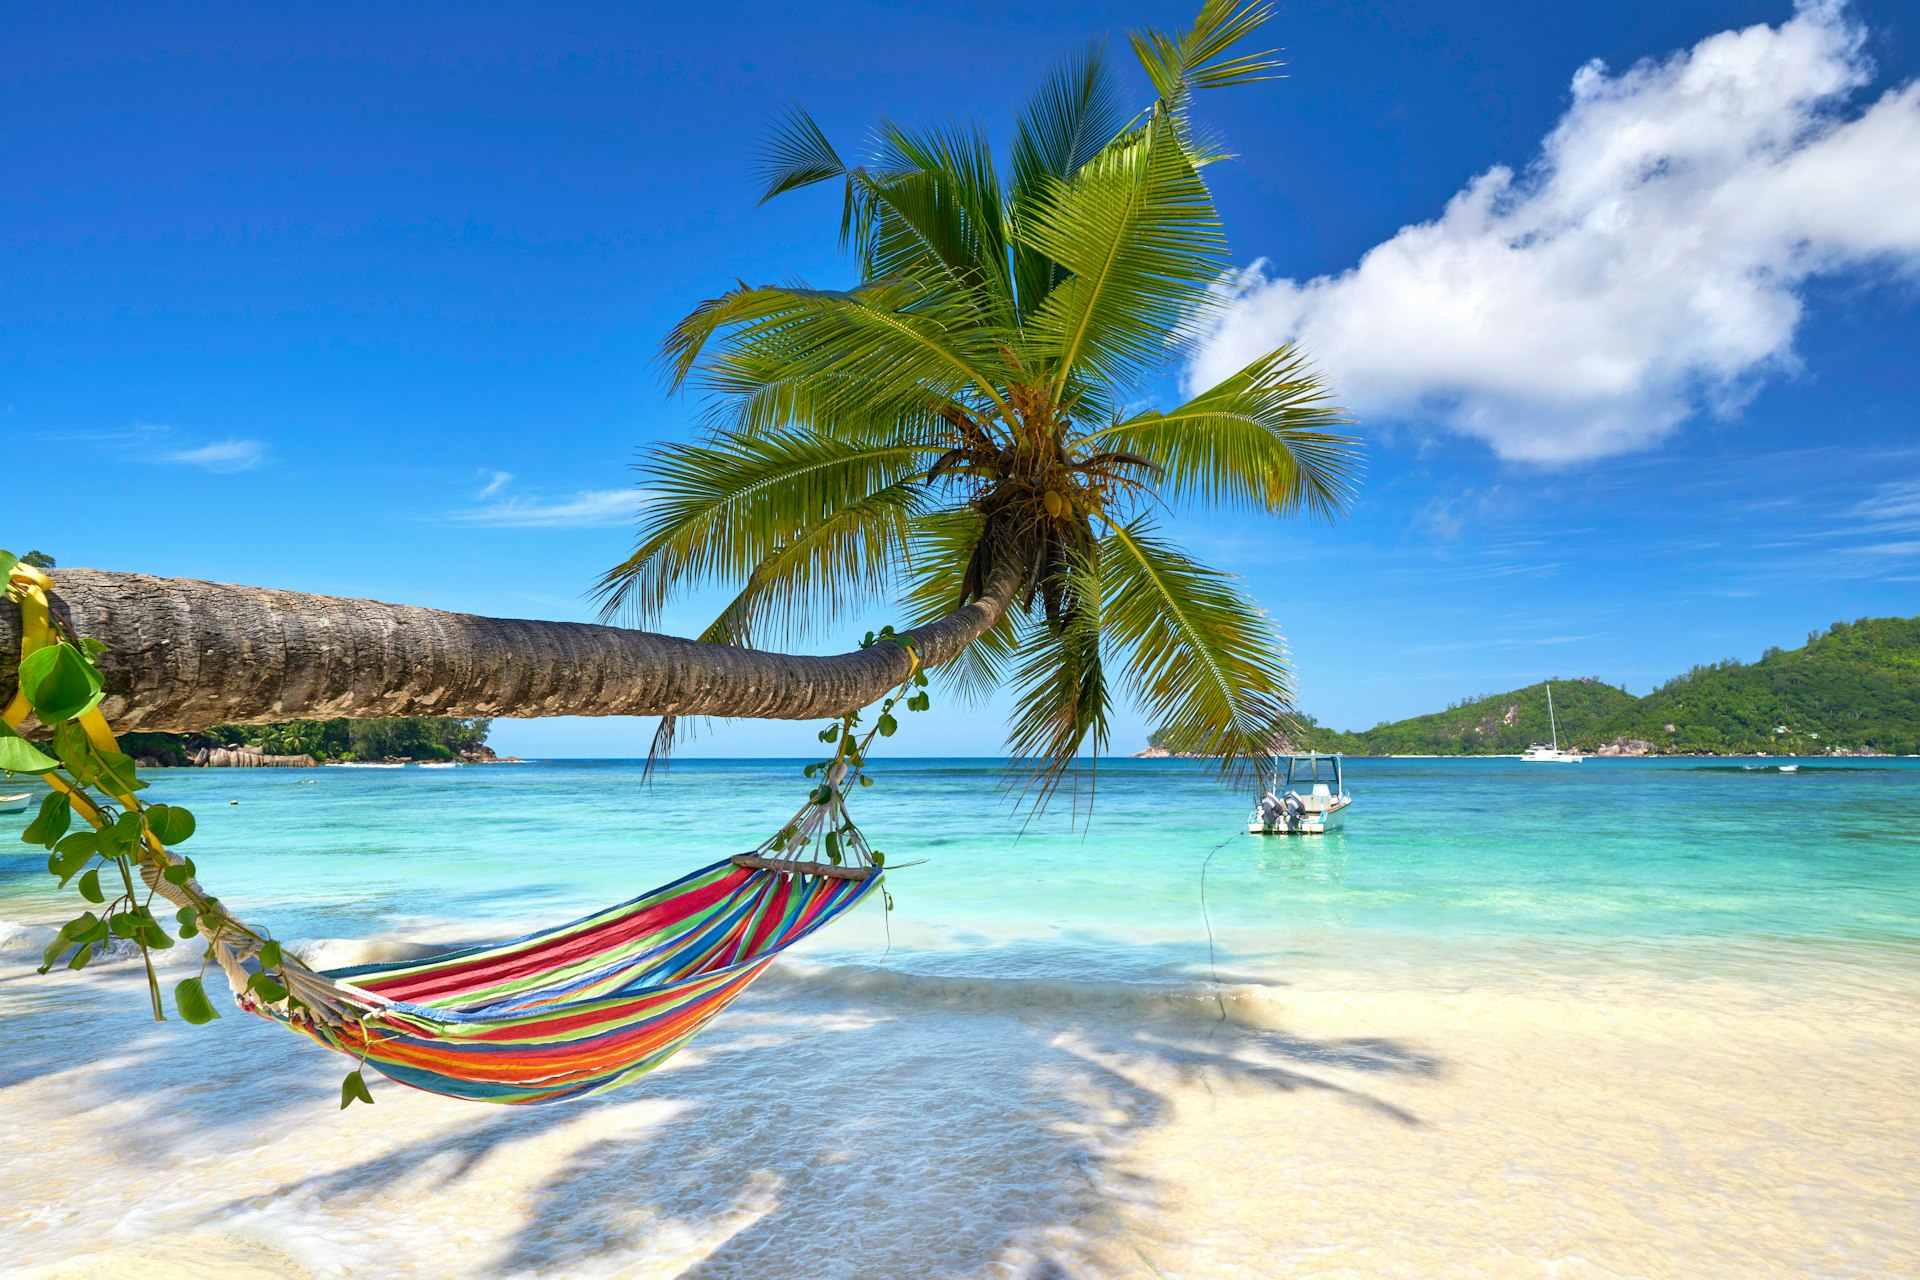 Hammock in the shadow of a coconut palm tree on a white sandy beach